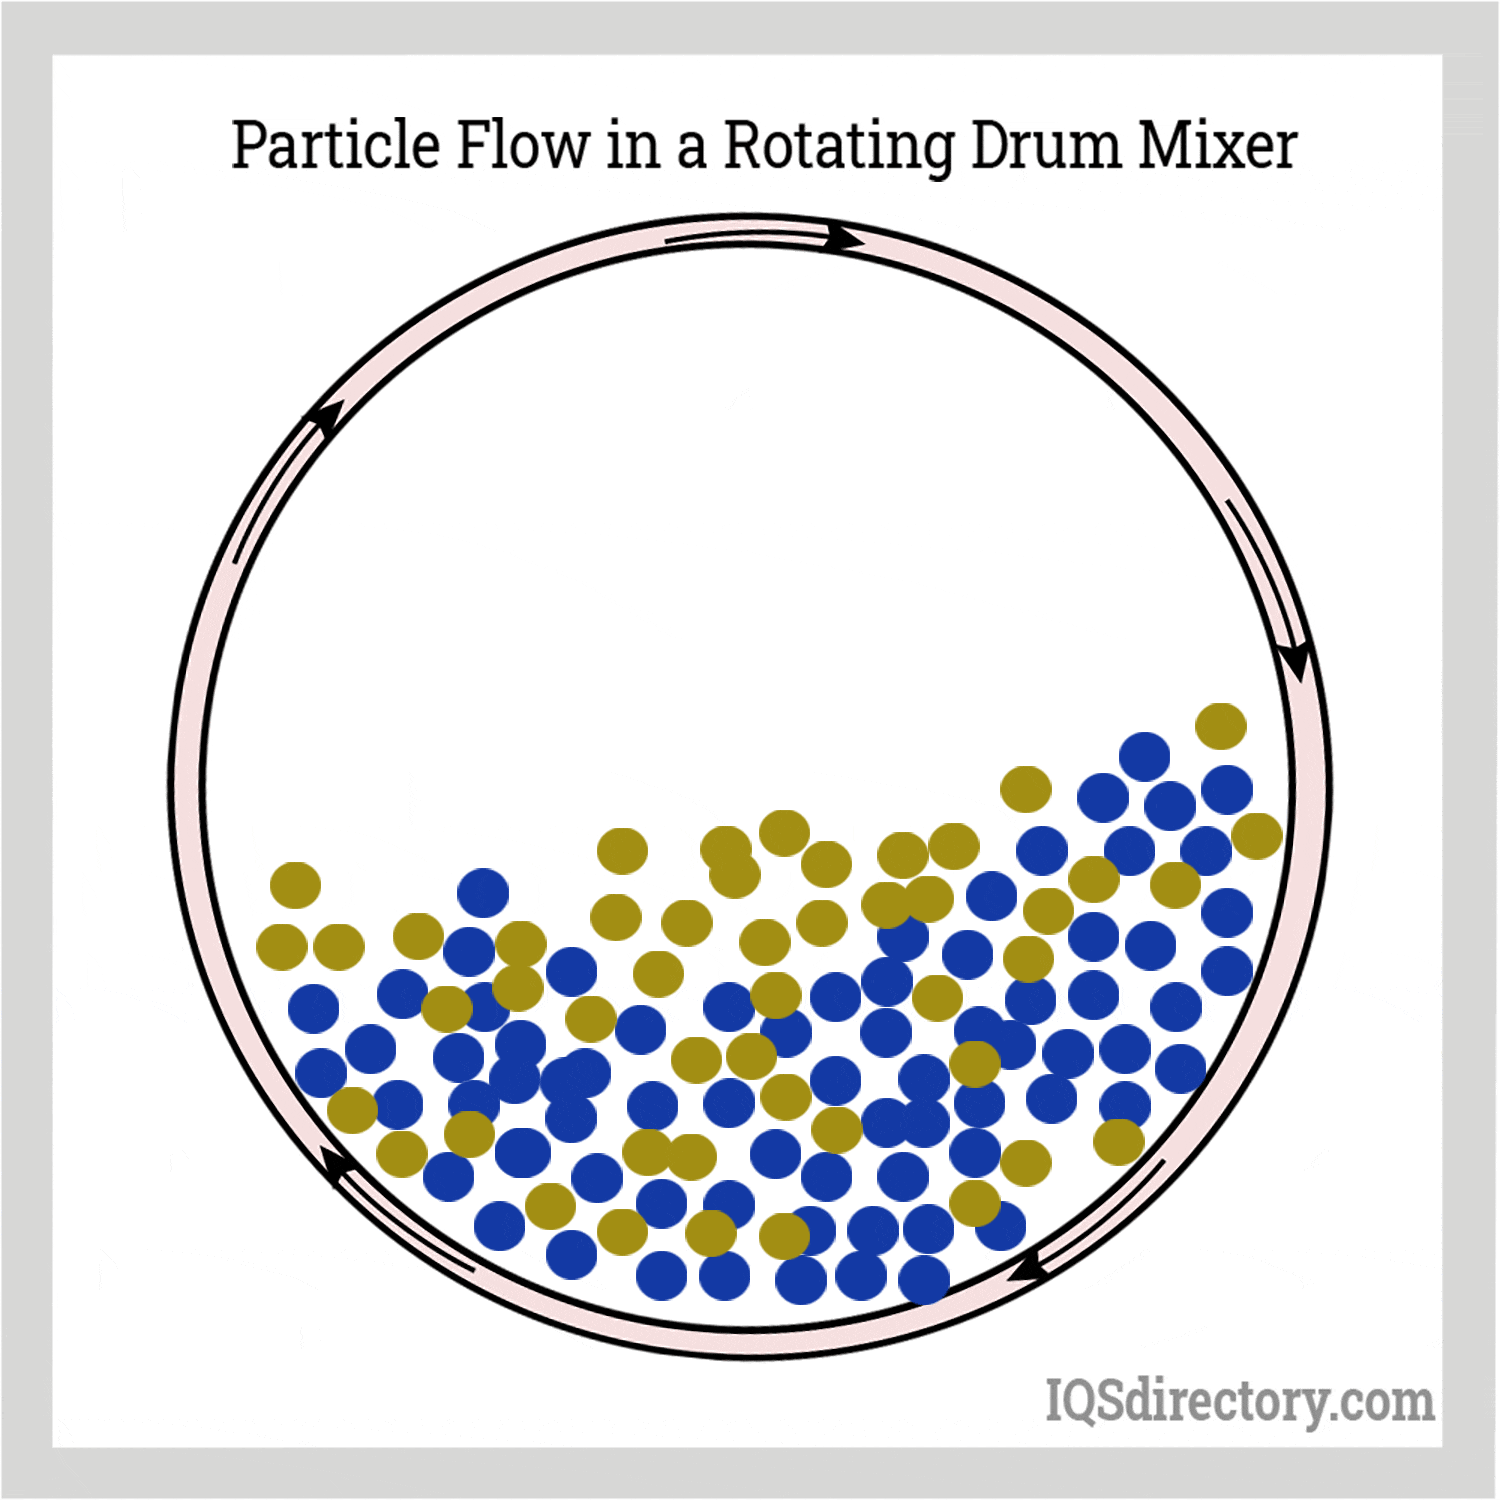 Particle Flow in a Rotating Drum Mixer